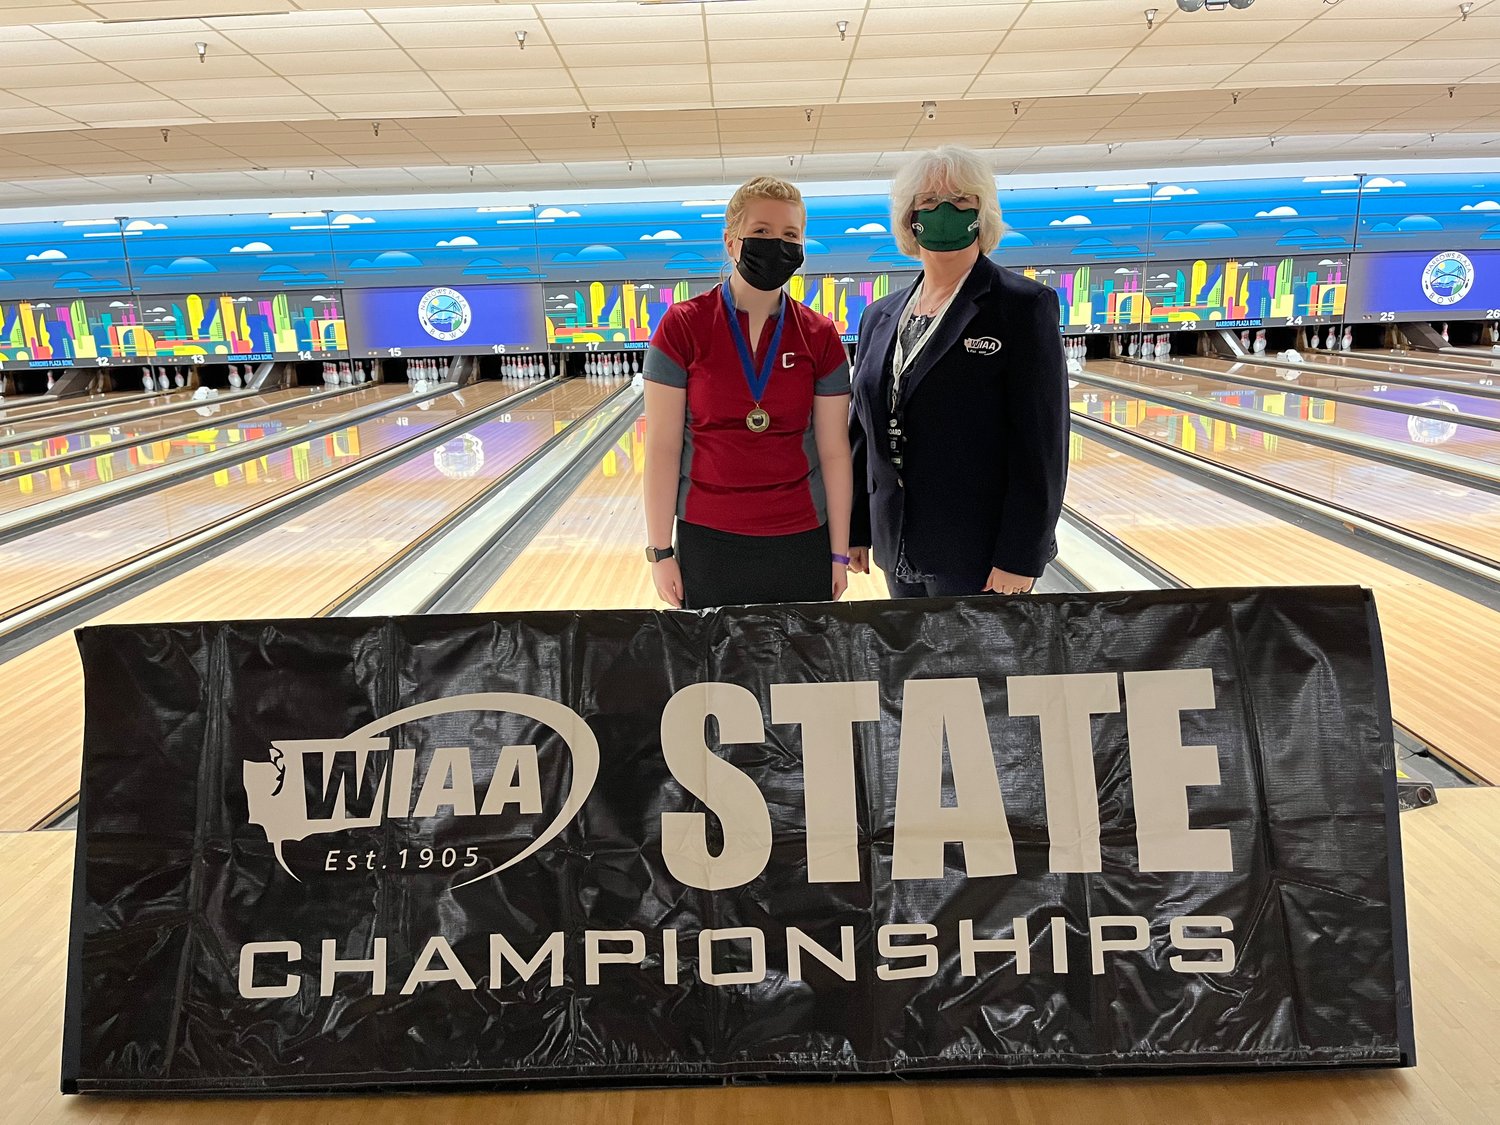 W.F. West junior Piper Chalmers, left, won the 1A/2A girls state bowling championship on Friday, Feb. 4. Chalmers won by 62 pins over the runner up.